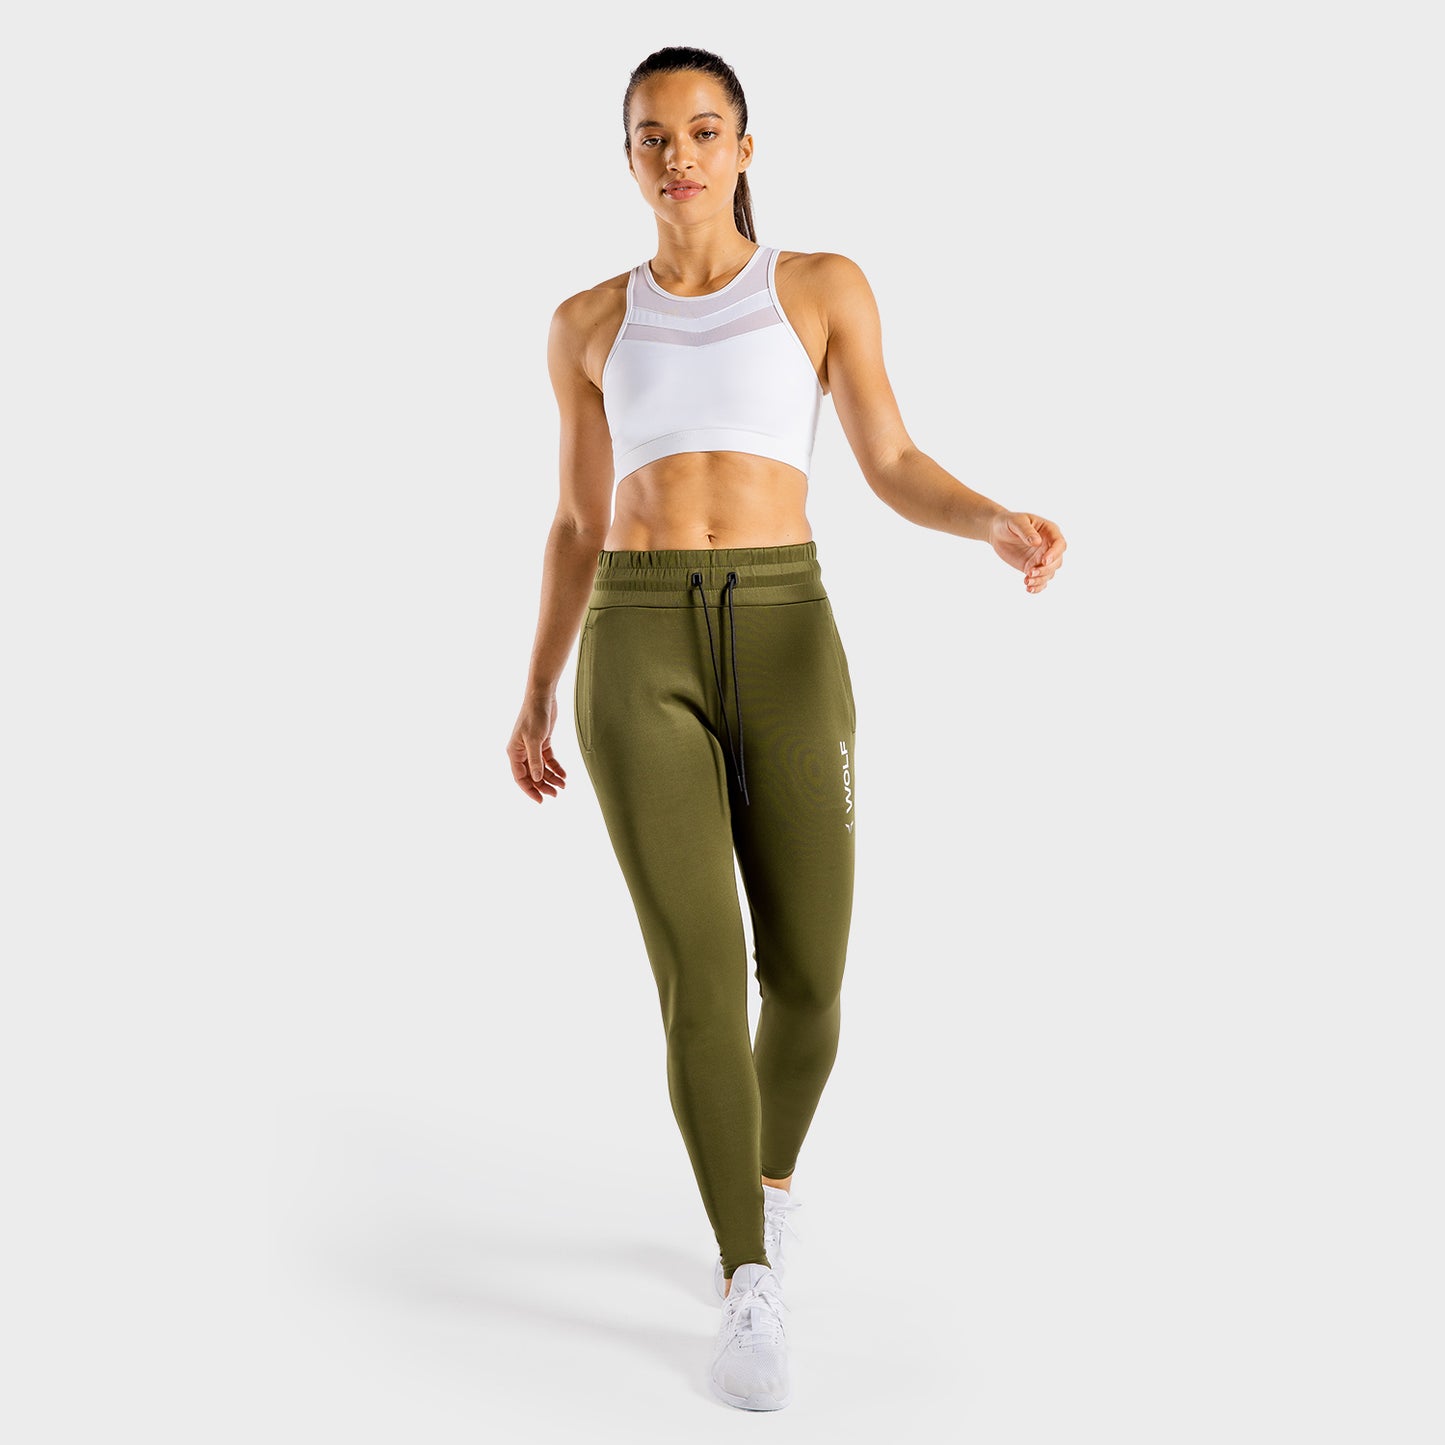 squatwolf-gym-pants-for-women-primal-joggers-pearl-khaki-workout-clothes